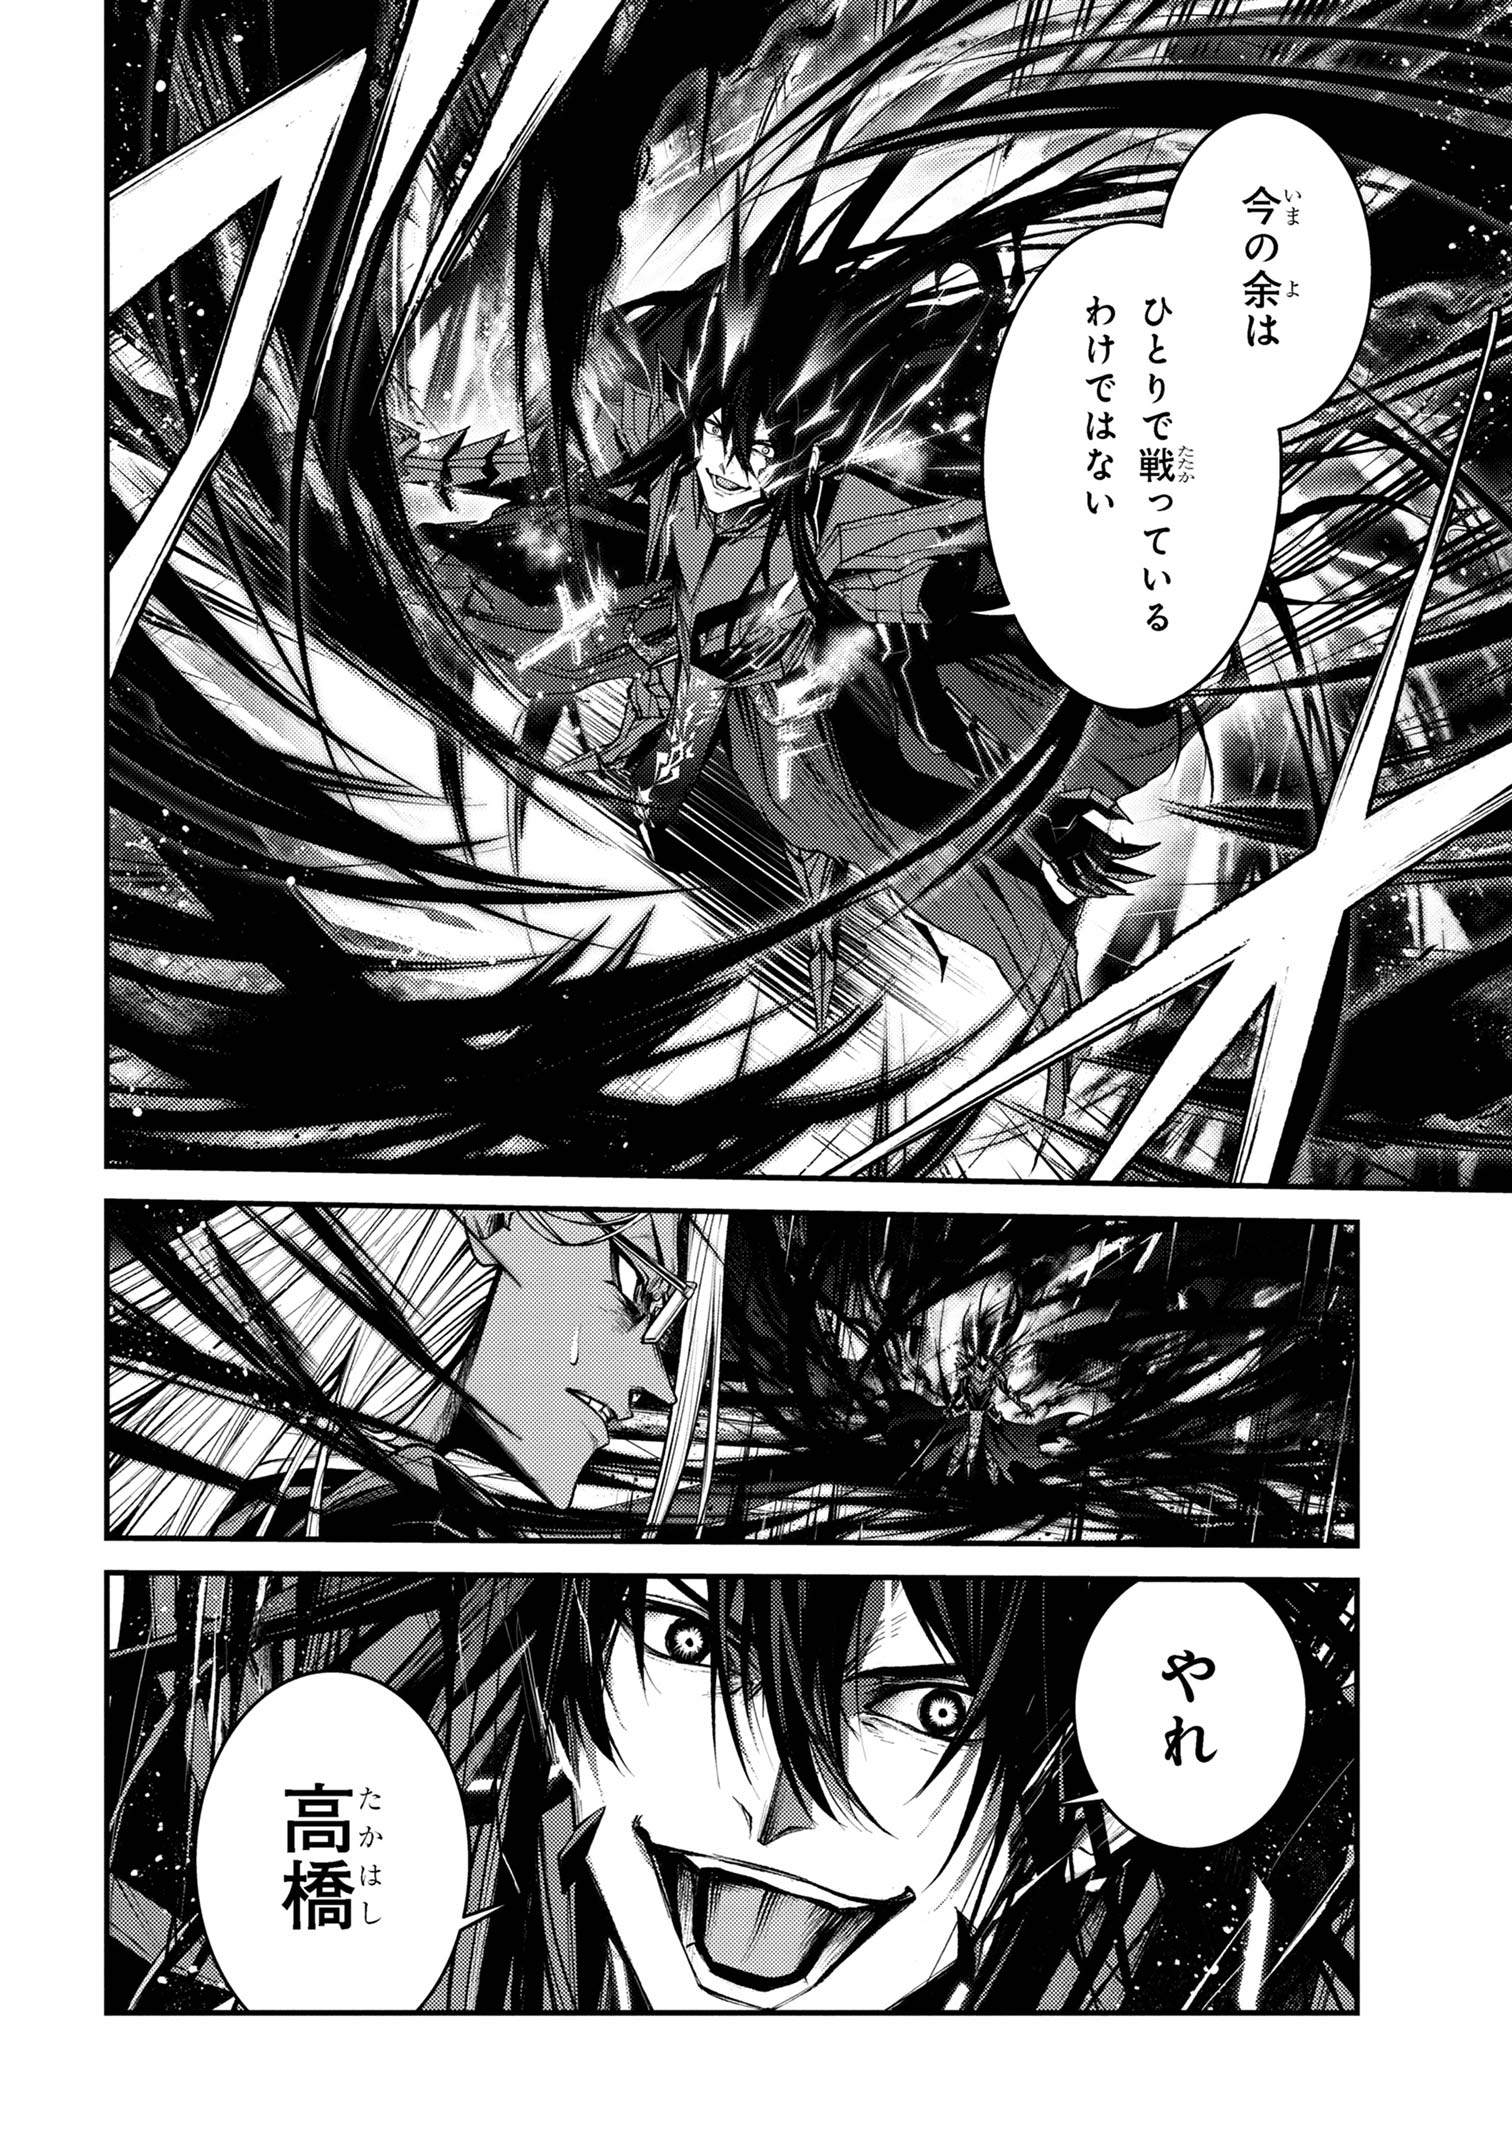 Maou 2099 - Chapter 13.1 - Page 4